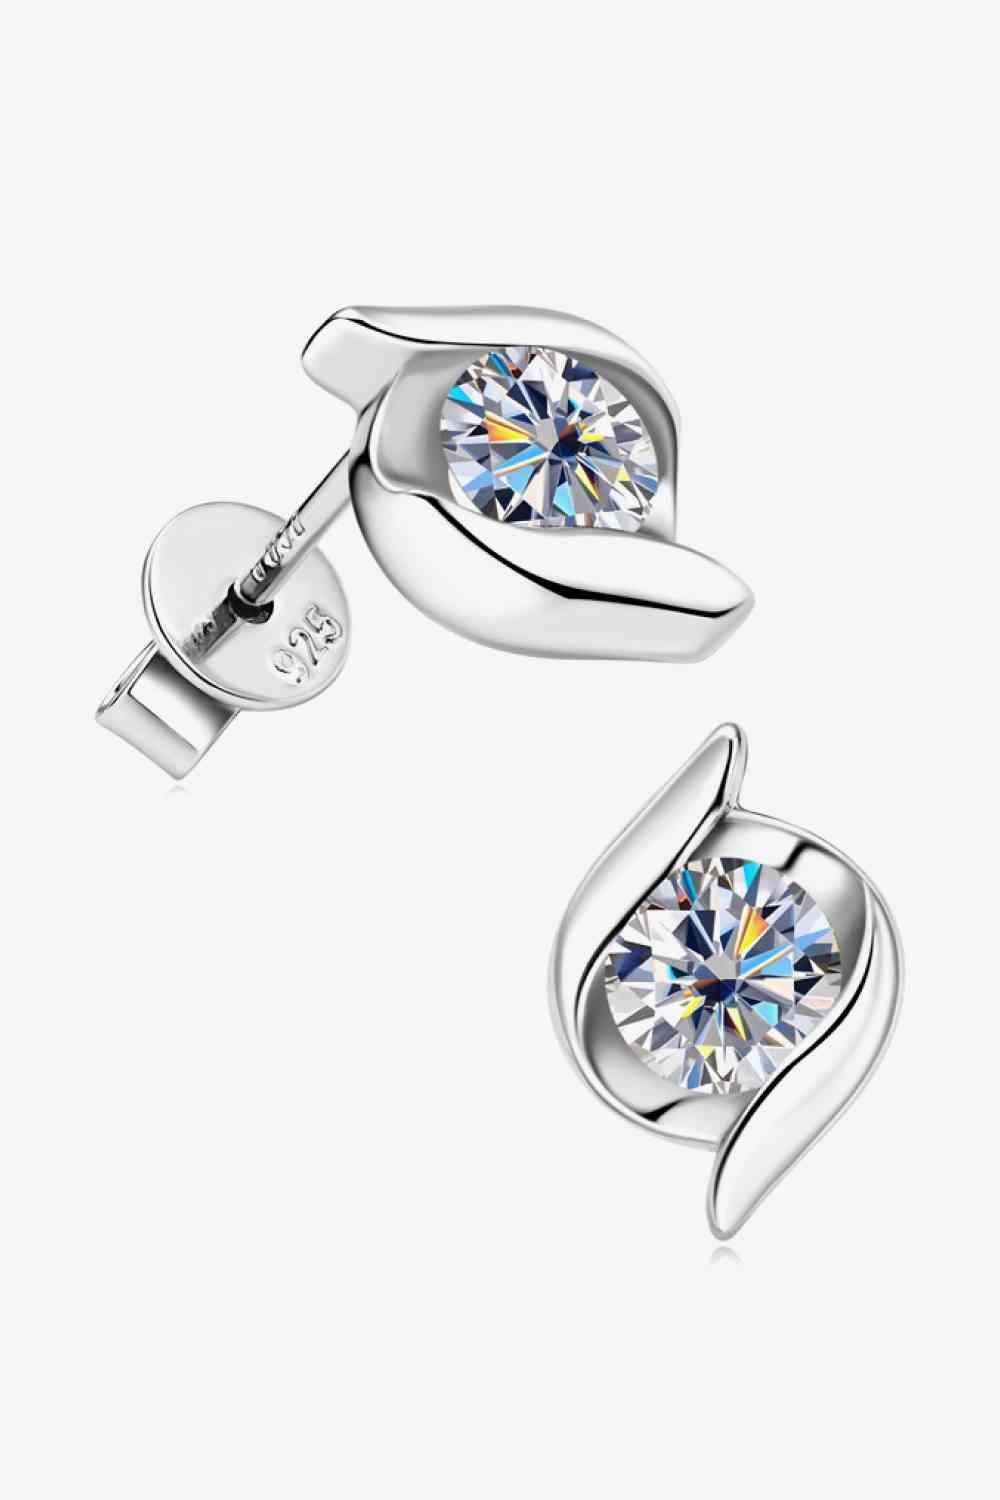 1 Carat Moissanite 925 Sterling Silver Stud Earrings - God's Girl Gifts And Apparel